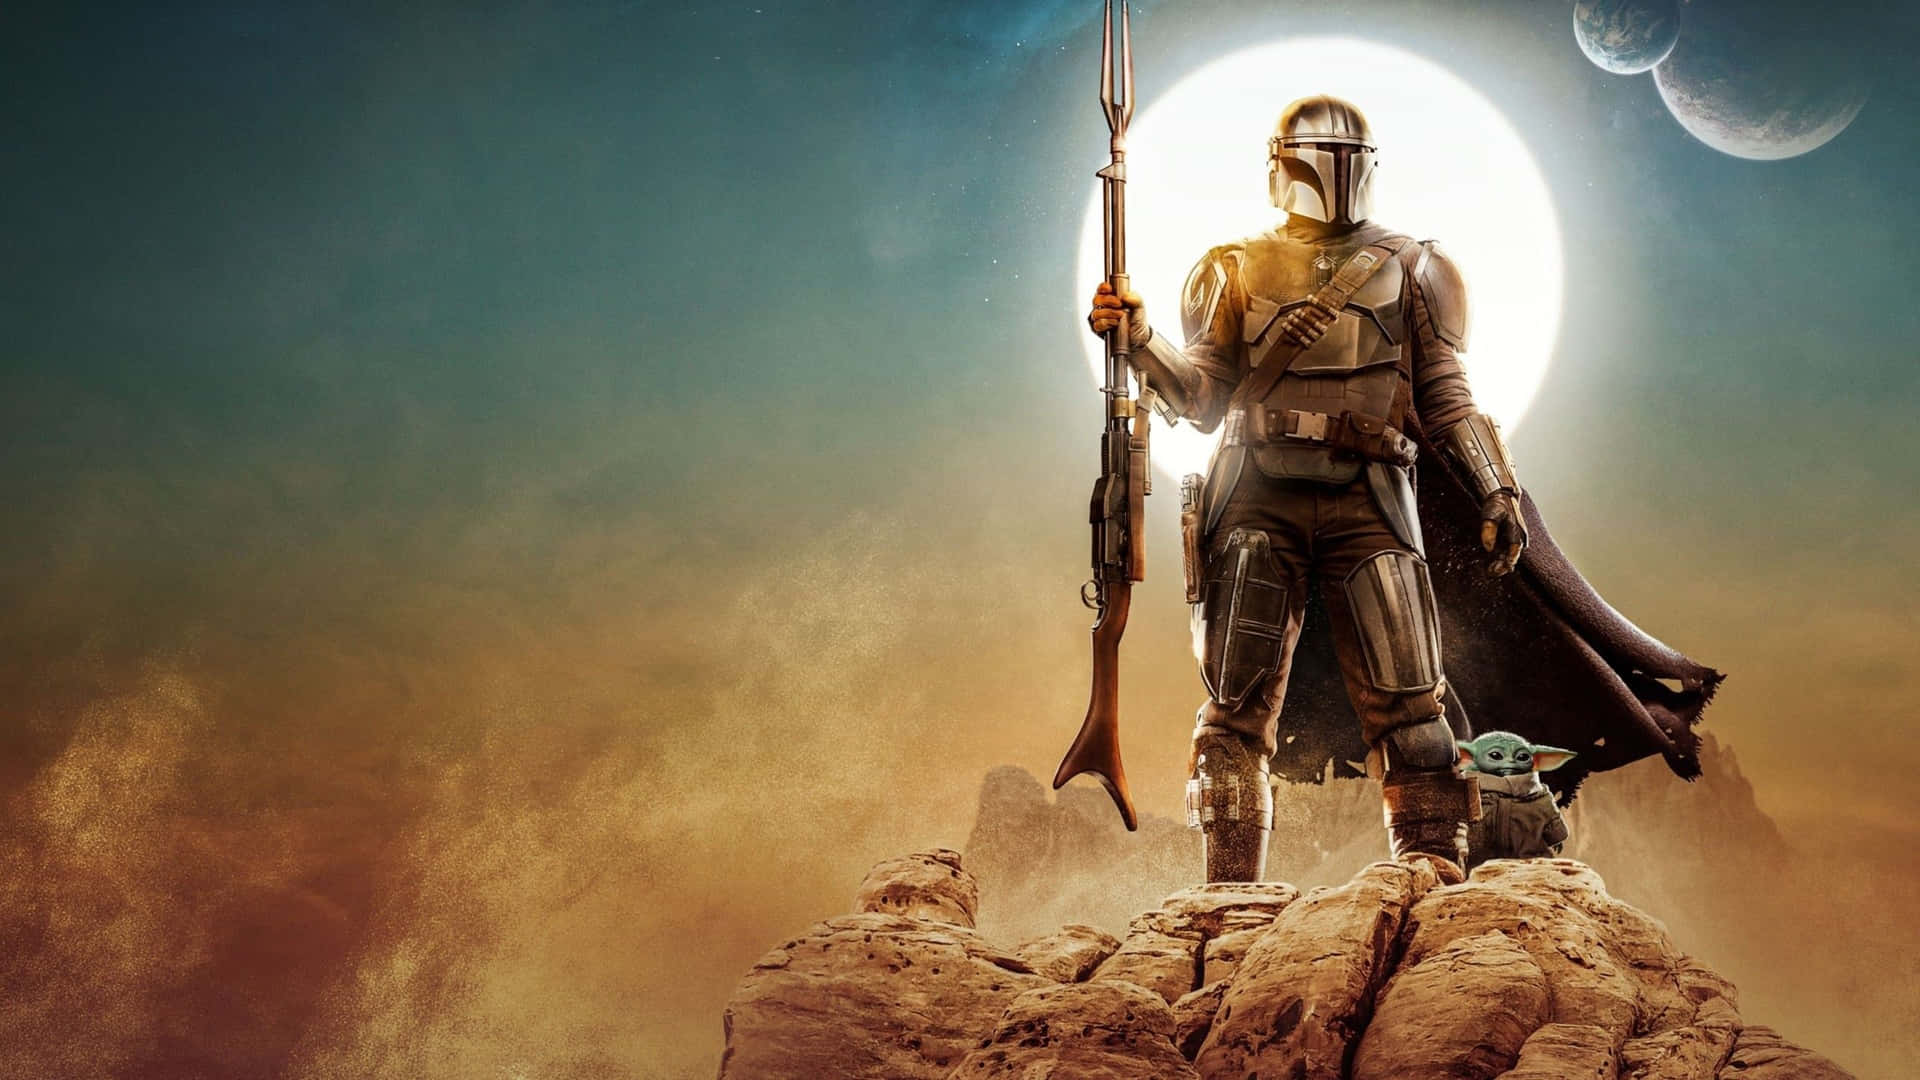 "Protecting The Galaxy: The Mission of The Mandalorian"